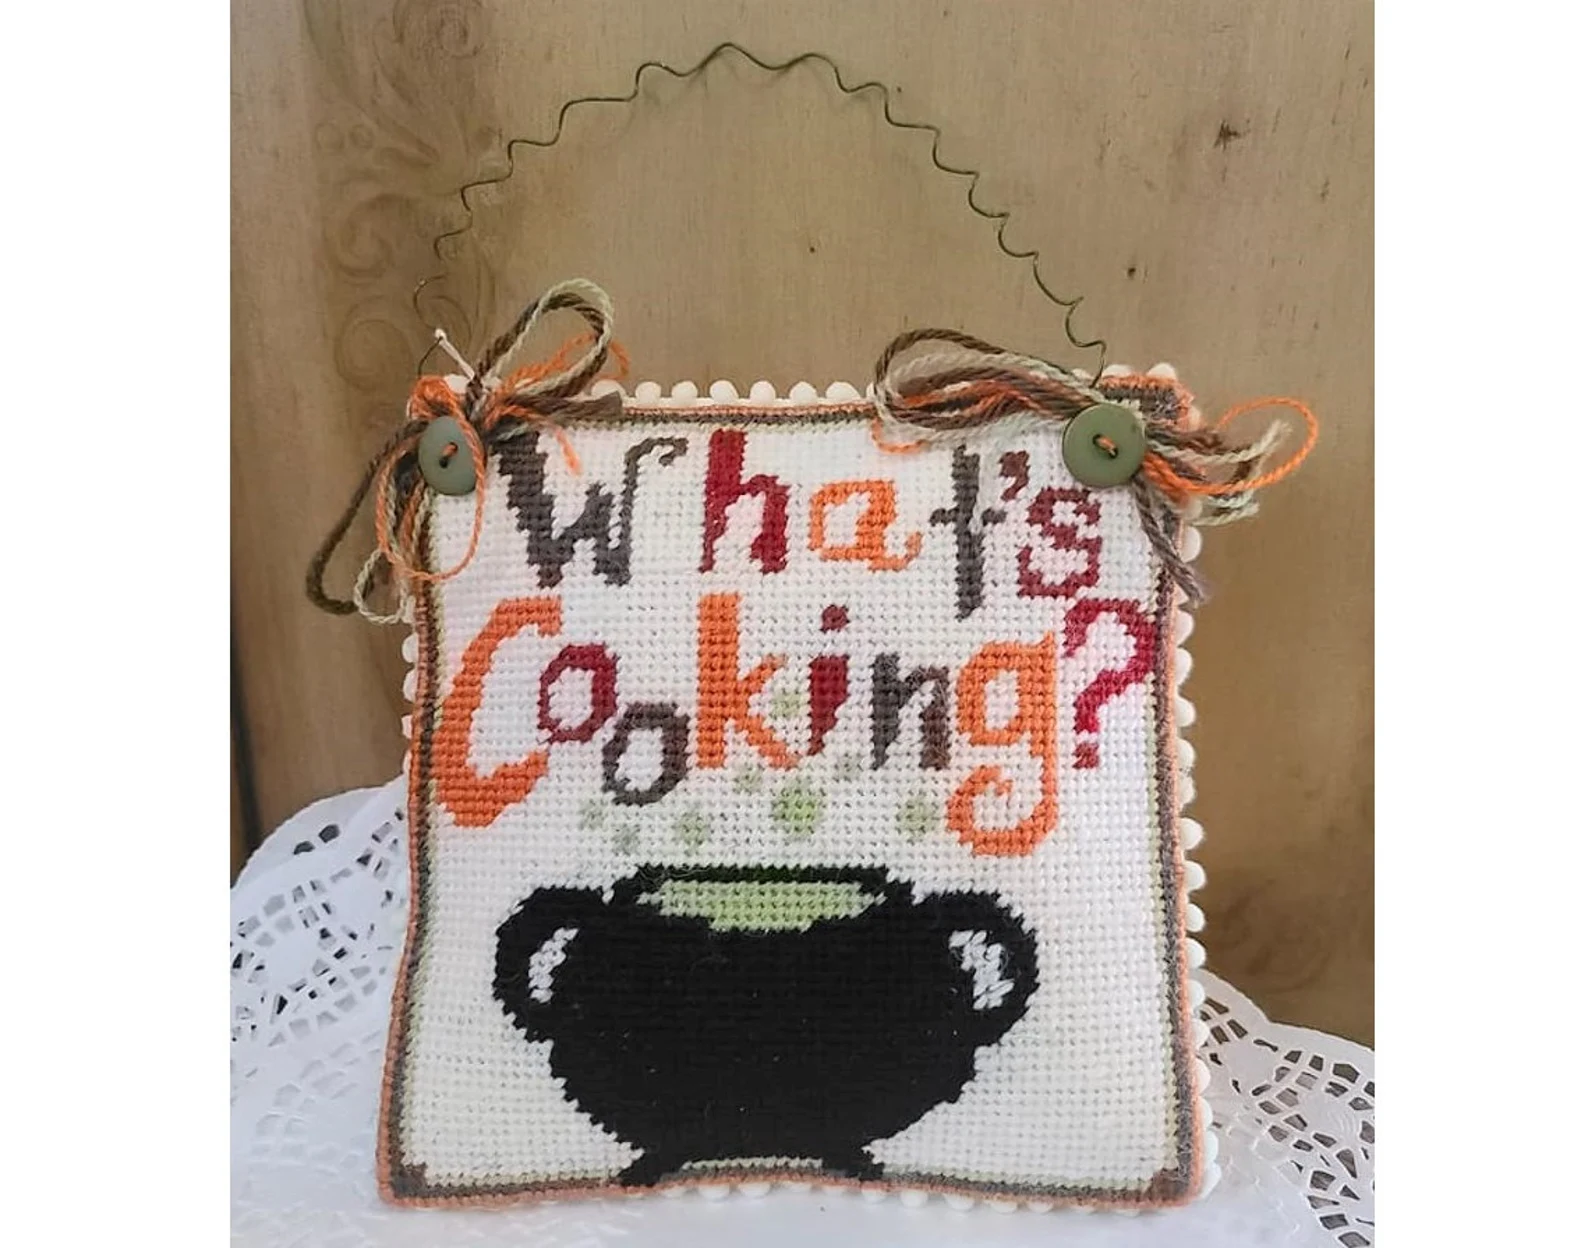 Needlepoint Whats Cooking Ornament Hanger